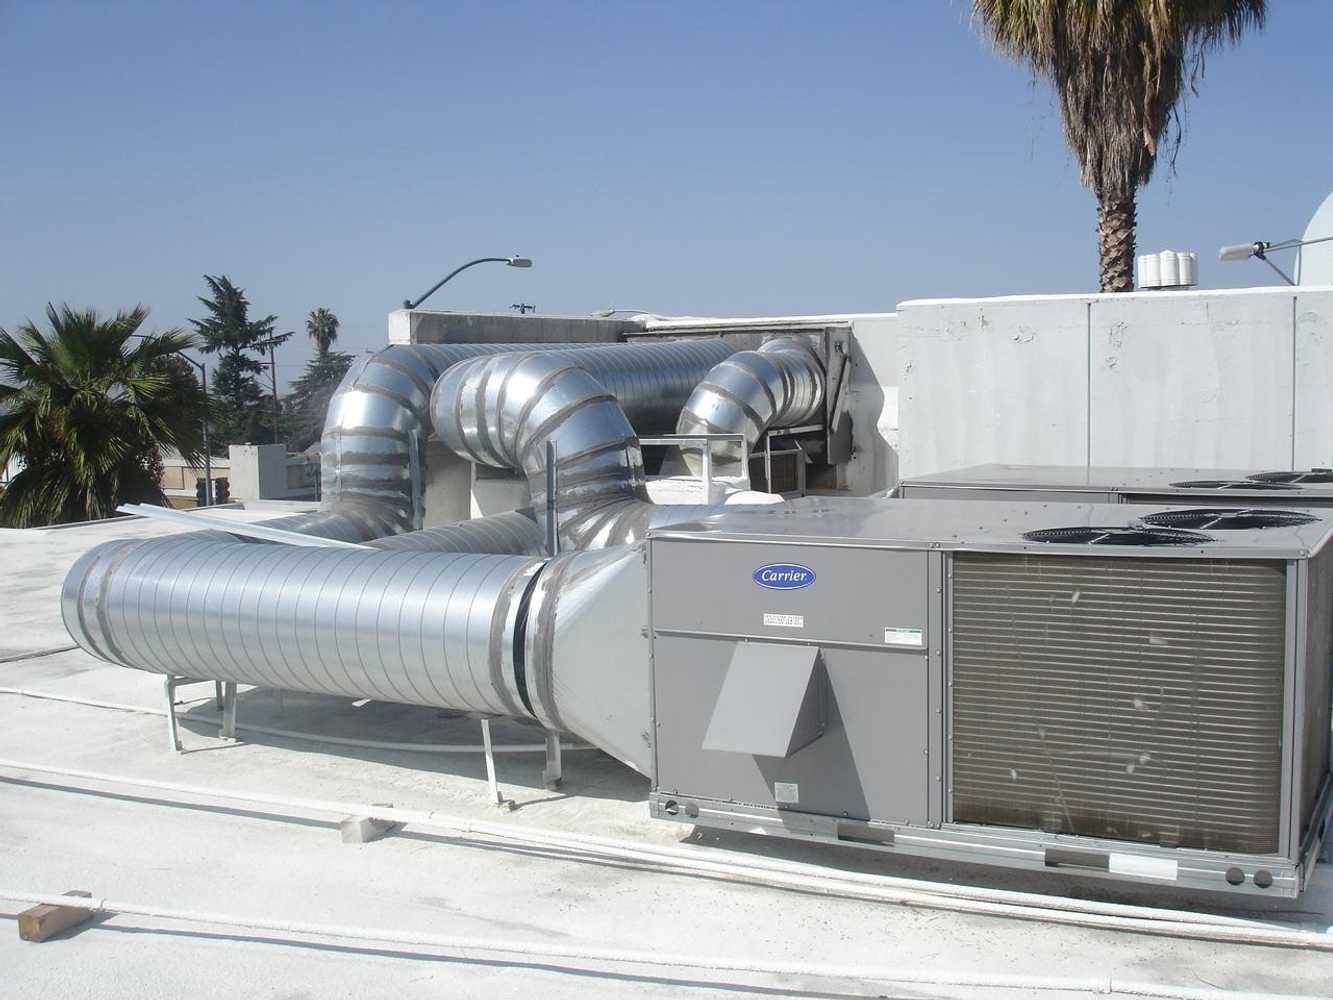 Desert Cooling Inc's projects